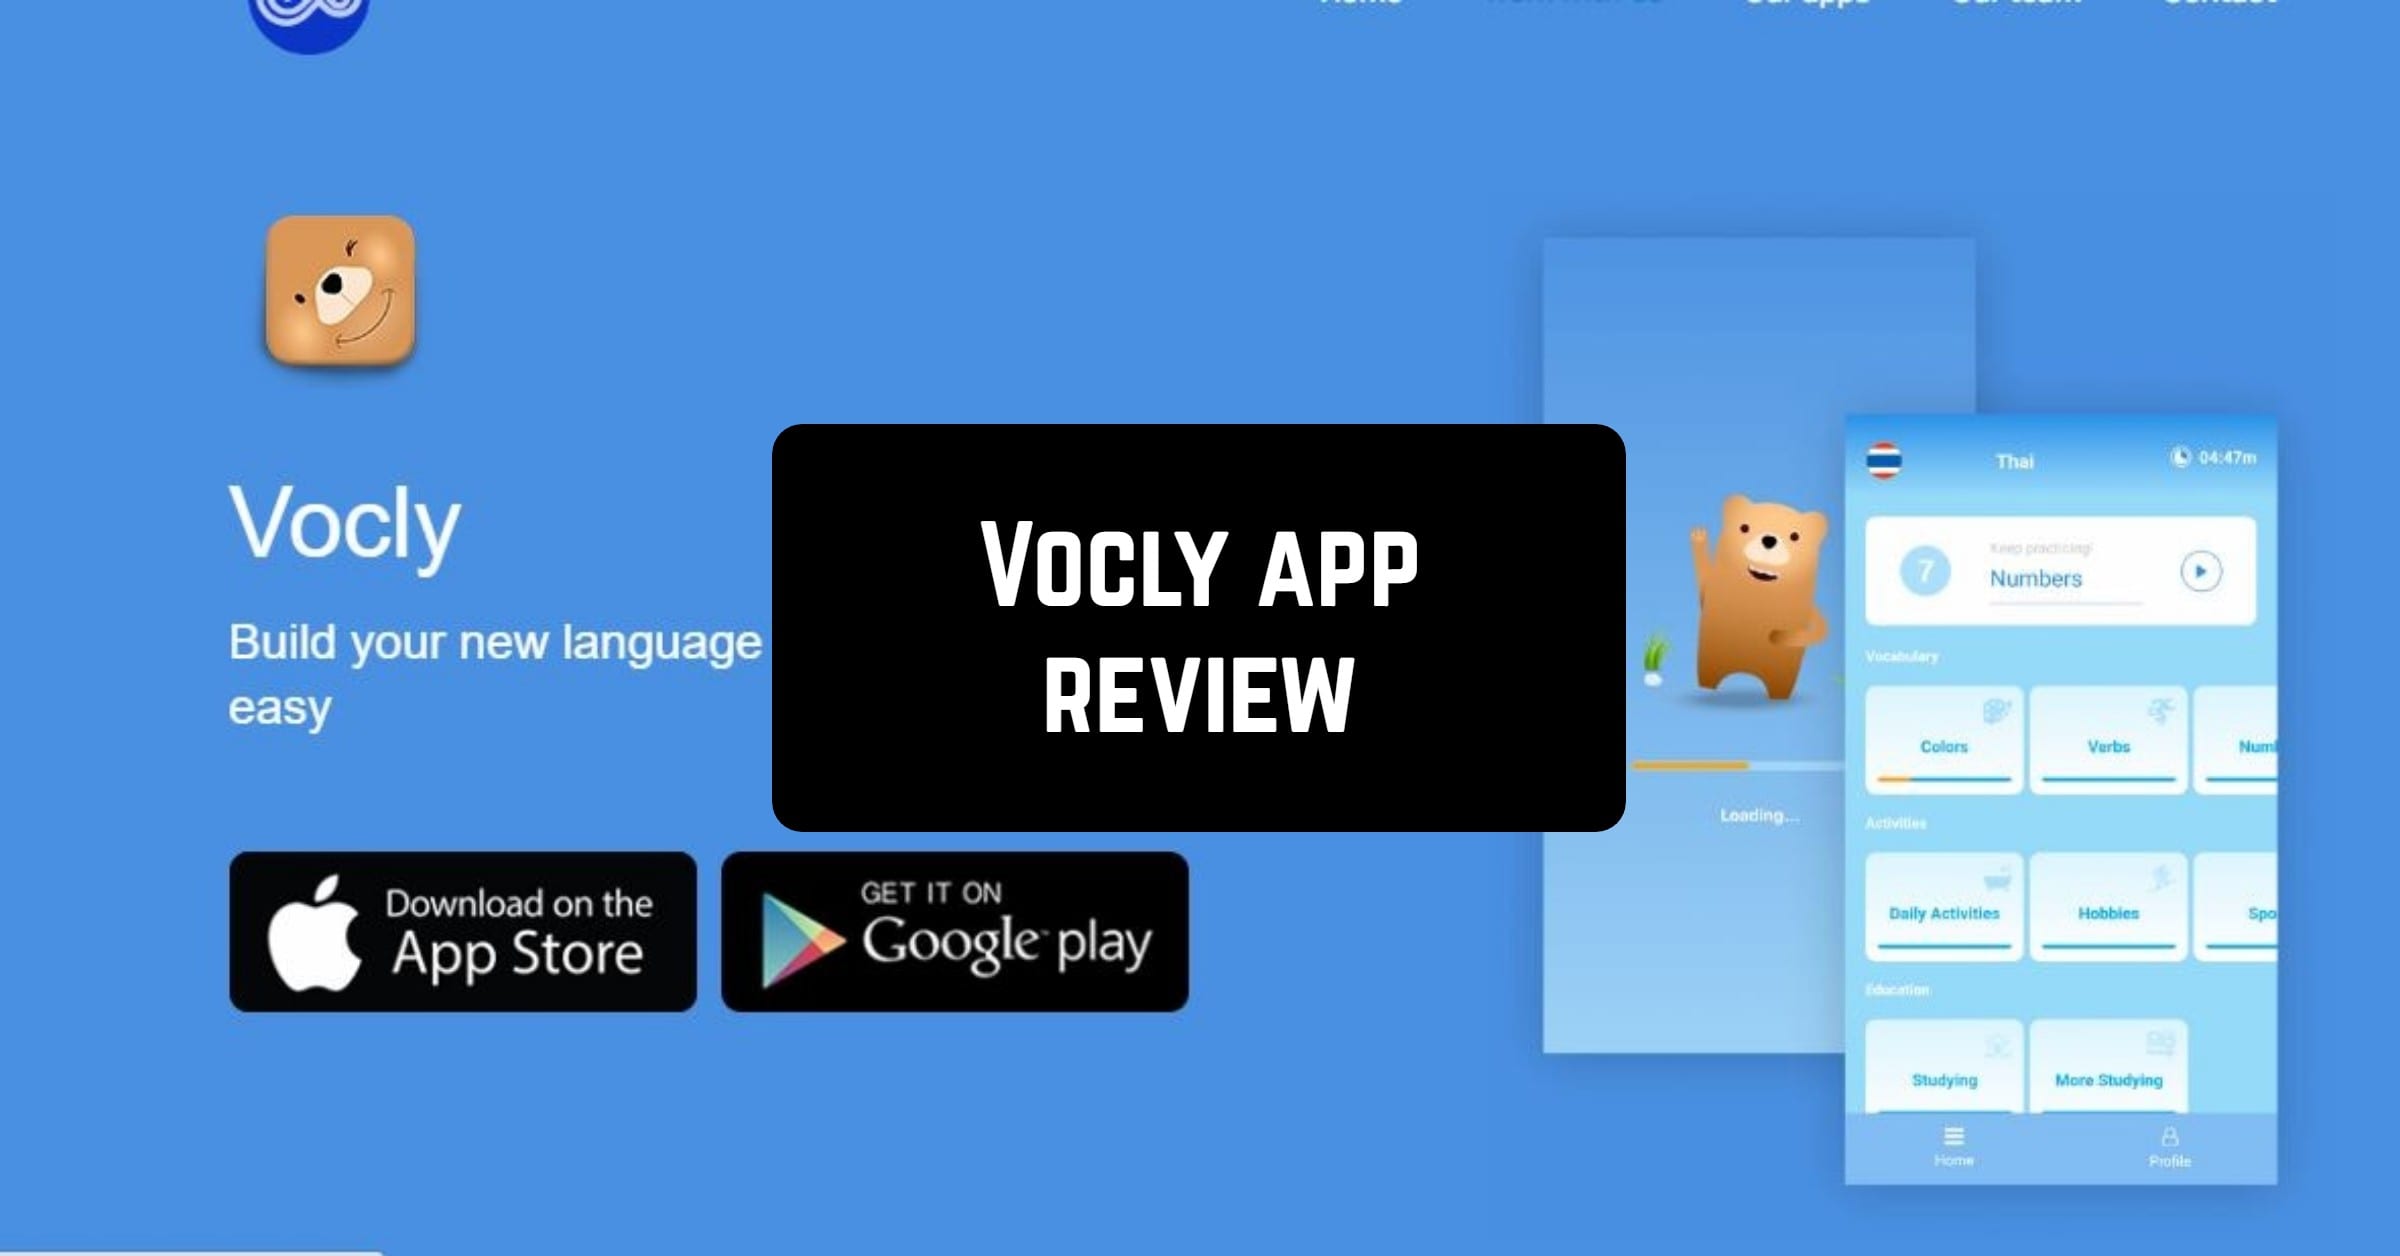 Vocly App Review - App pearl - Best mobile apps for Android & iOS devices